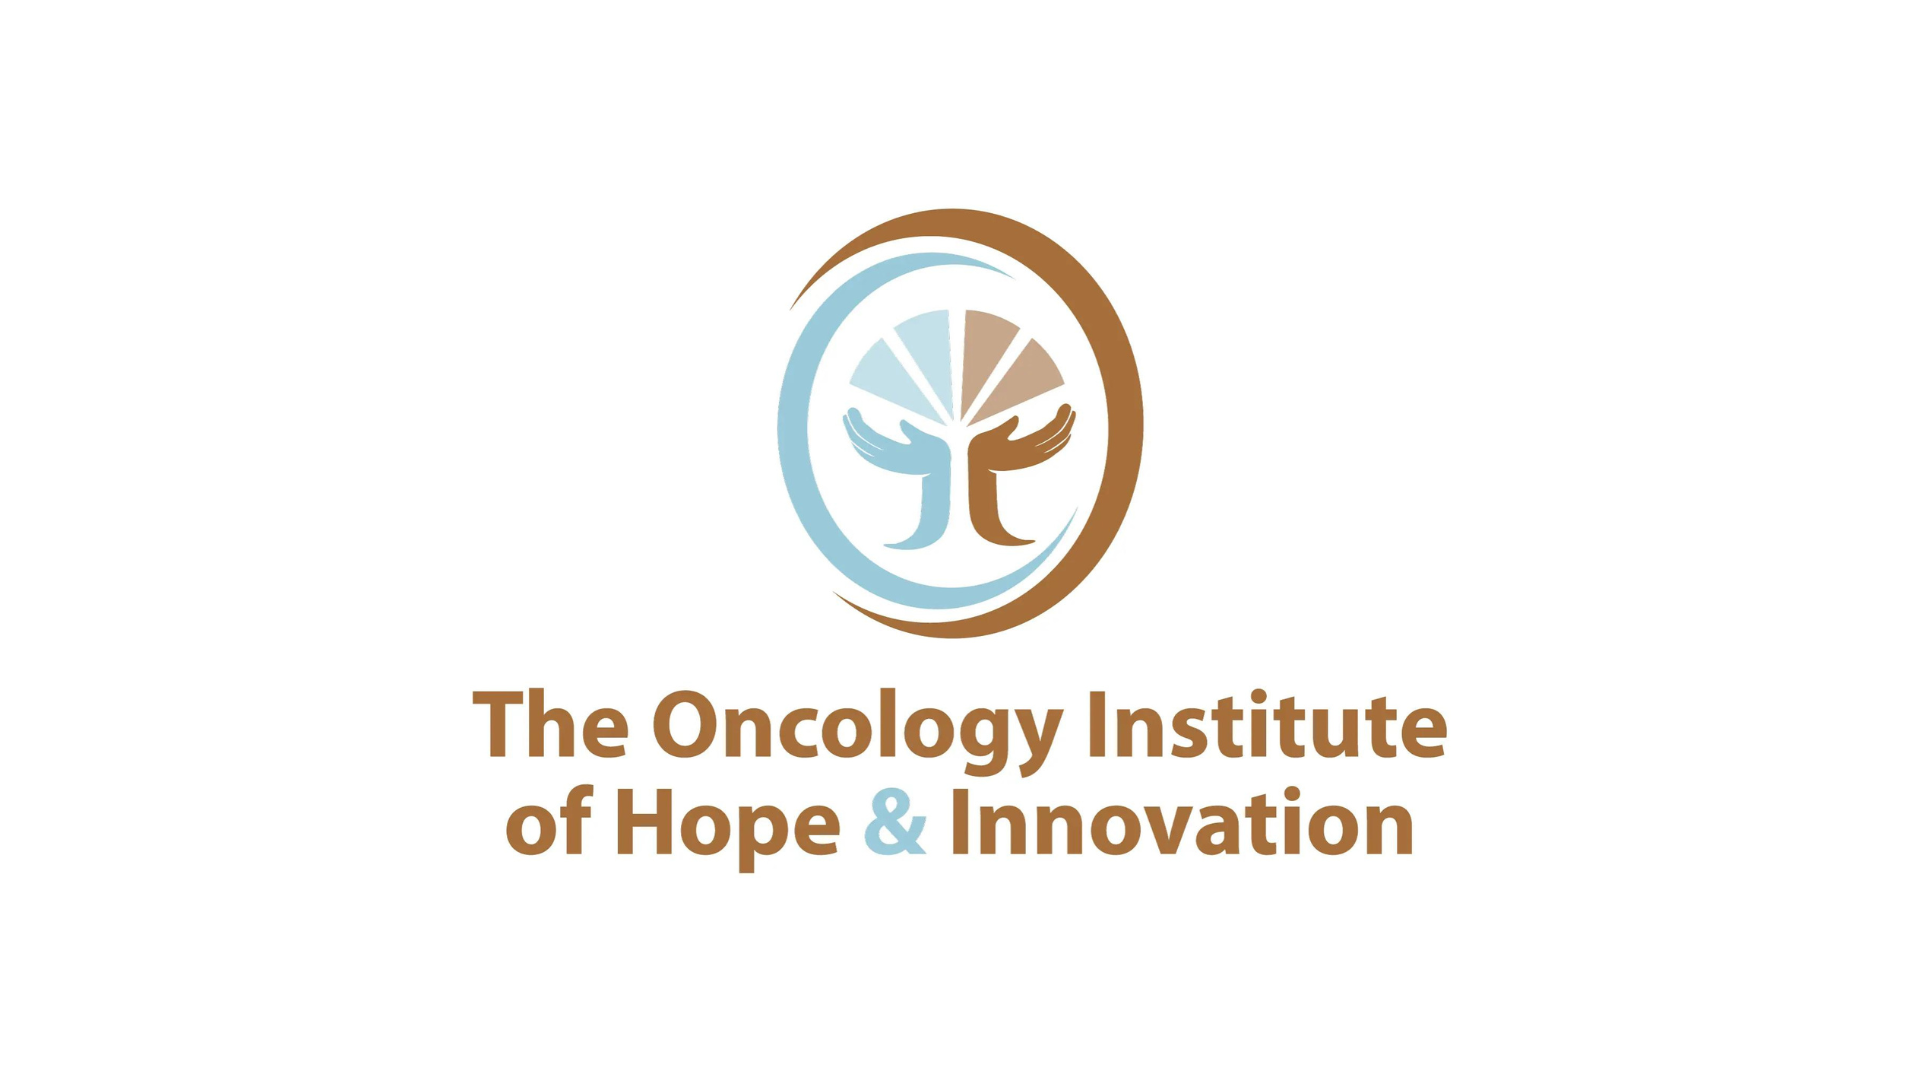 The Oncology Institute Announces New Leaders to Oversee Technology and Clinical Research